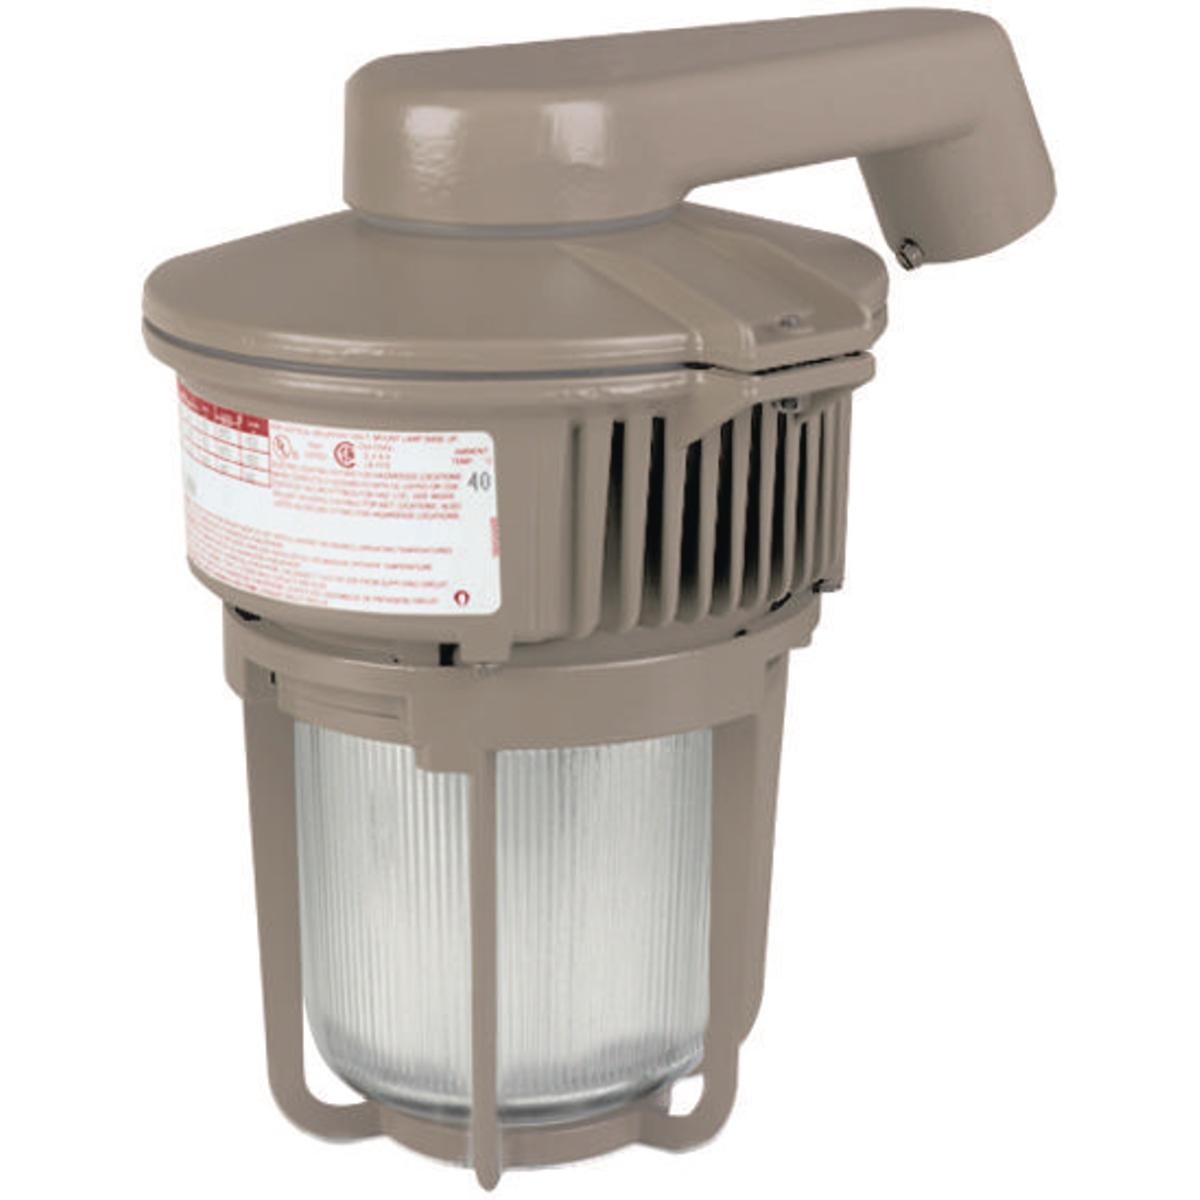 Hubbell MBL151-GD4 150W HPS Fluorescent 120V  1-1/4" Stanchion Mount  ; Ballast tank and splice box – corrosion resistant copper-free aluminum alloy ; Baked powder epoxy/polyester finish, electrostatically applied for complete, uniform corrosion protection ; All external ha